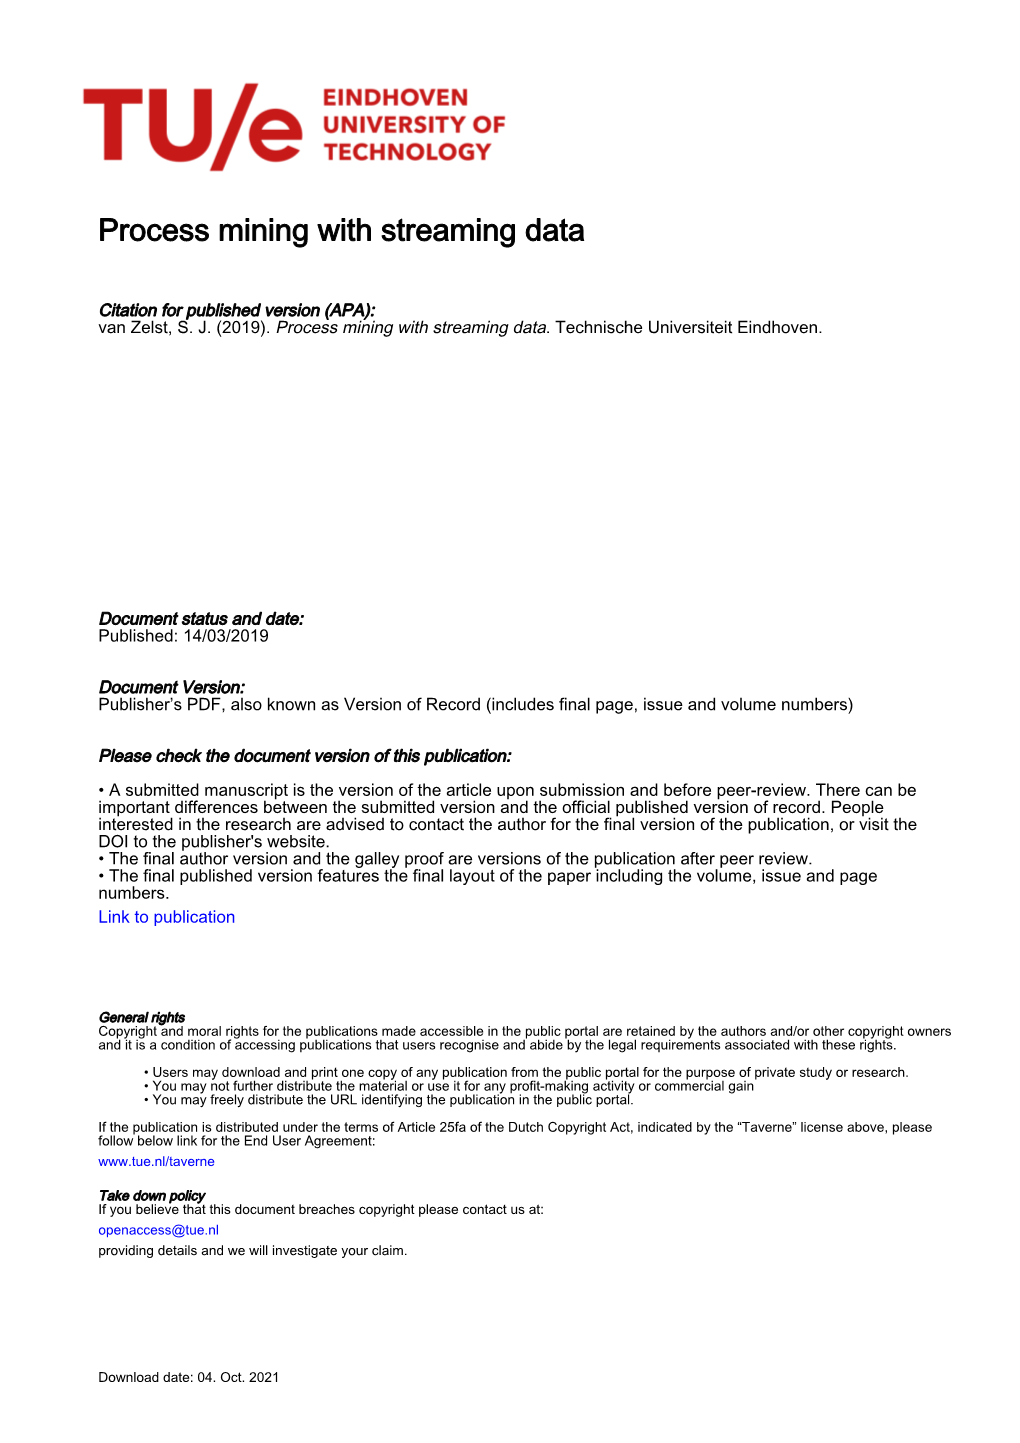 Process Mining with Streaming Data